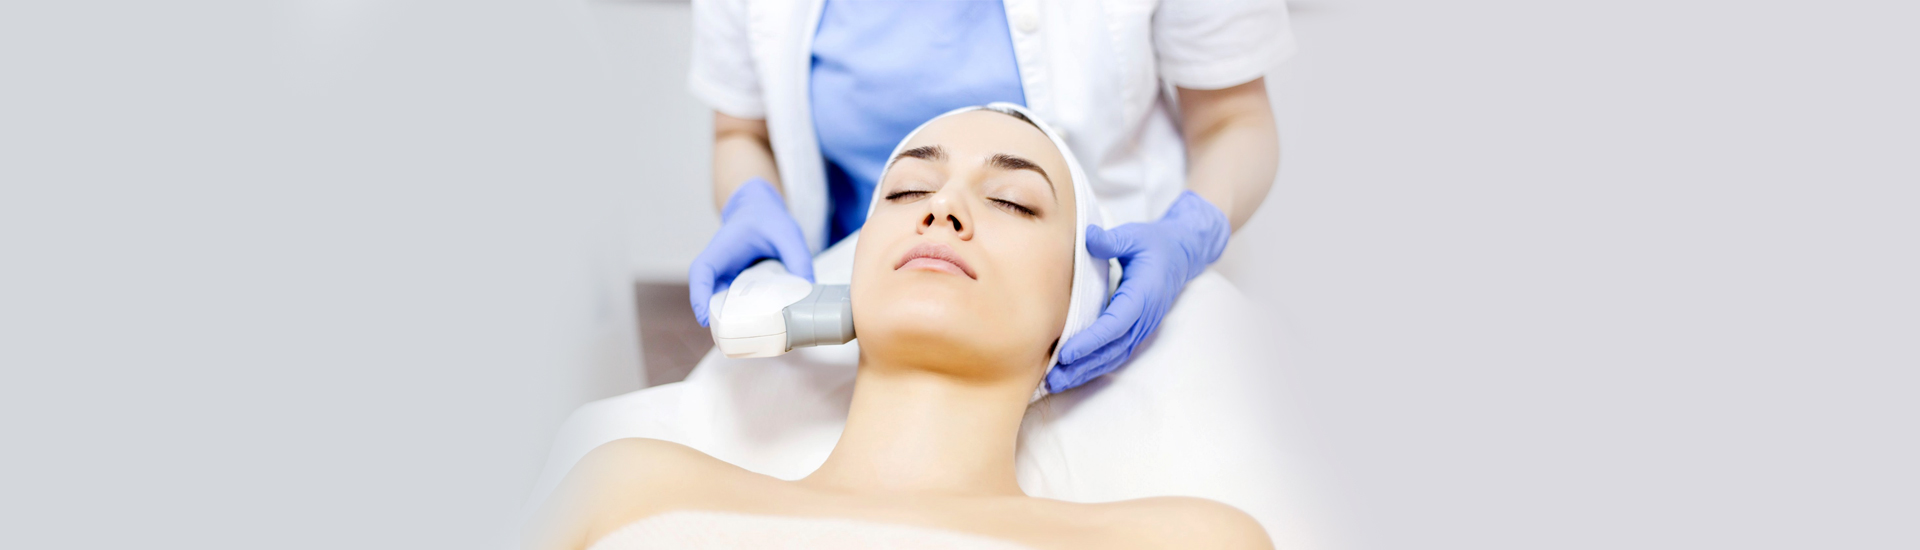 Intense Pulsed Light (IPL) Therapy